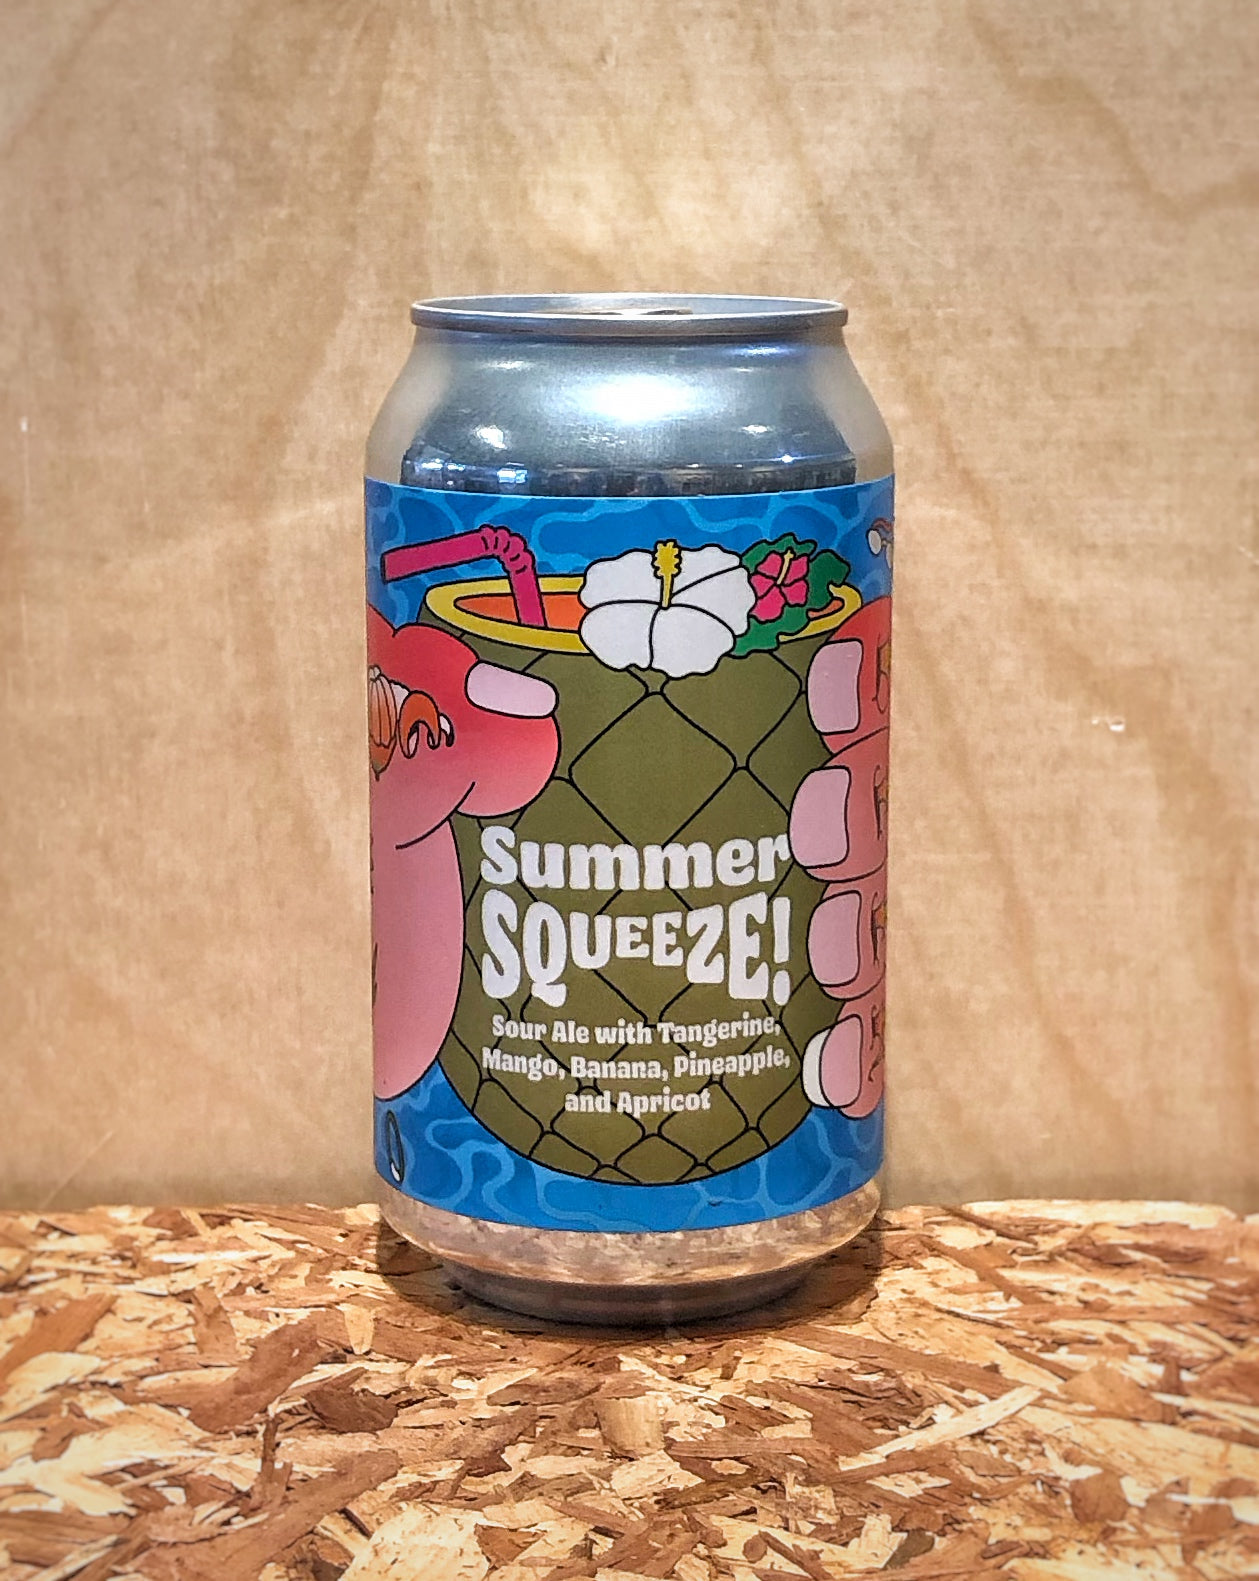 Prairie Artisan Ales 'Summer Squeeze' Sour Ale with Tangerine, Mango, Banana, Pineapple, and Apricot (Oklahoma City, OK)